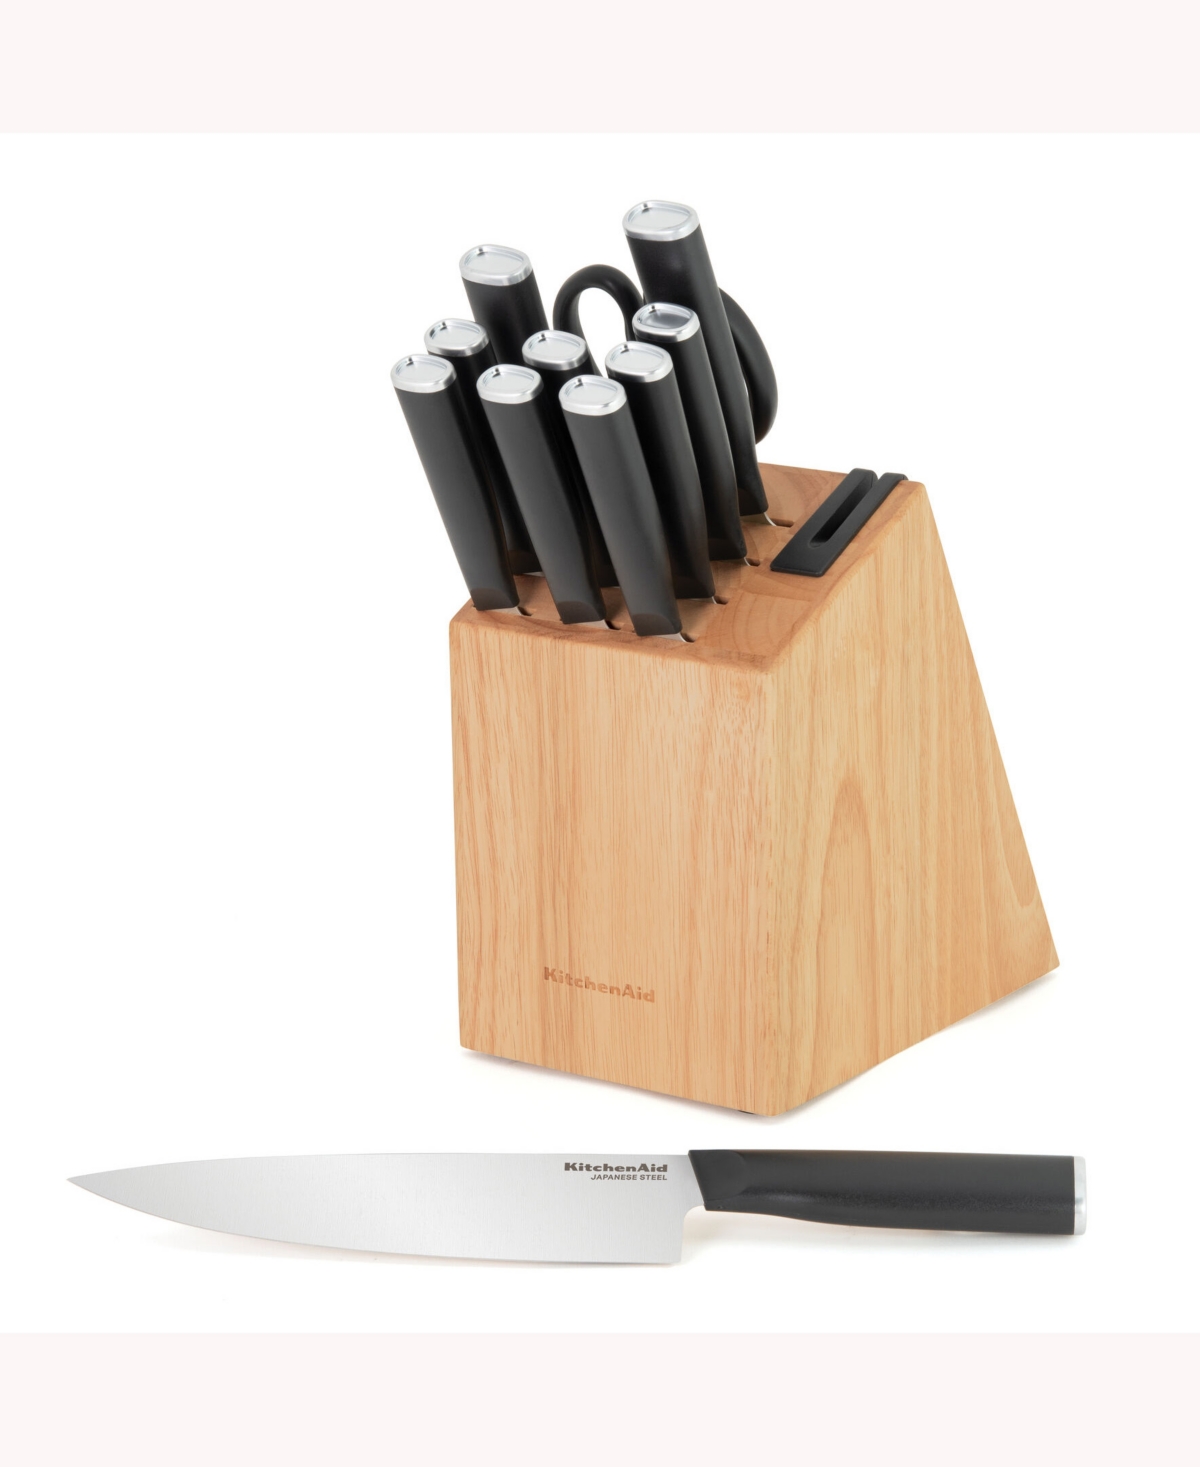 Shop Kitchenaid Japanese Steel Classic 12 Piece Knife Block Set With Built In Knife Sharpener In Black